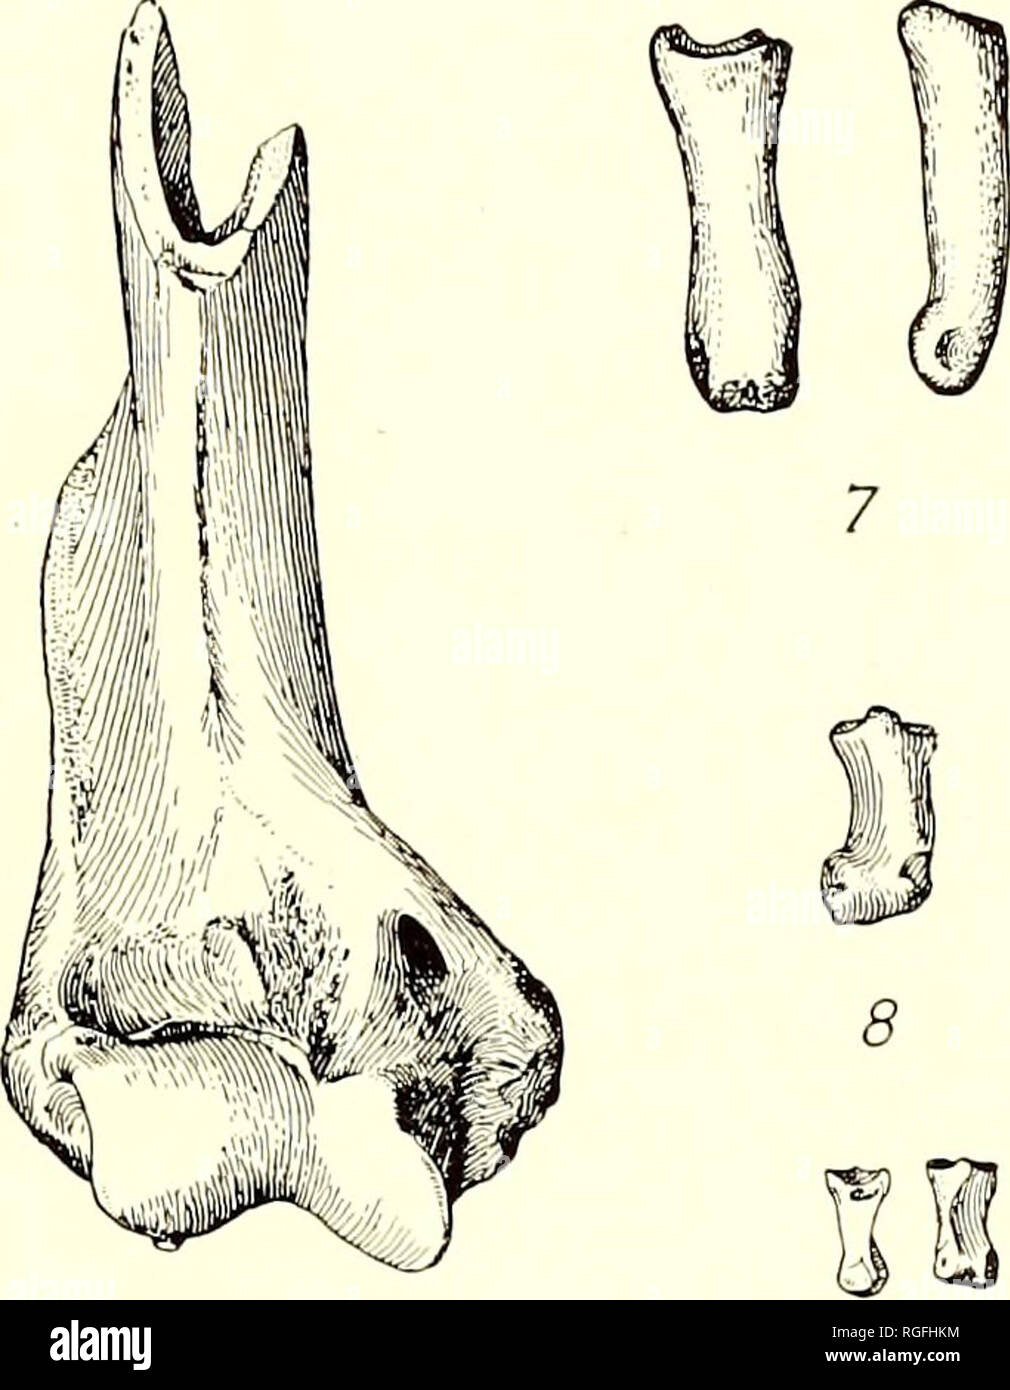 . Bulletin of the Department of Geology. Geology. 1916] Merriam: Fauna of Cedar Mountain Region 175 MUSTELID?, sp A portion of a small mandible no. 19781 (fig. 5) represents a Canis-like form with slender but thick jaws, small M1; very small and one-rooted M2, and no M3. It presumably represents an unknown mustelid in the Cedar Mountain fauna. FELID, sp. A. A small phalangeal element (no. 19800, fig. 9). of a felid form from Stewart Valley, local- ity 2027, represents a cat of ap- proximately the dimensions of the existing wildcat. It is un- certain whether it represented the feline or the mac Stock Photo